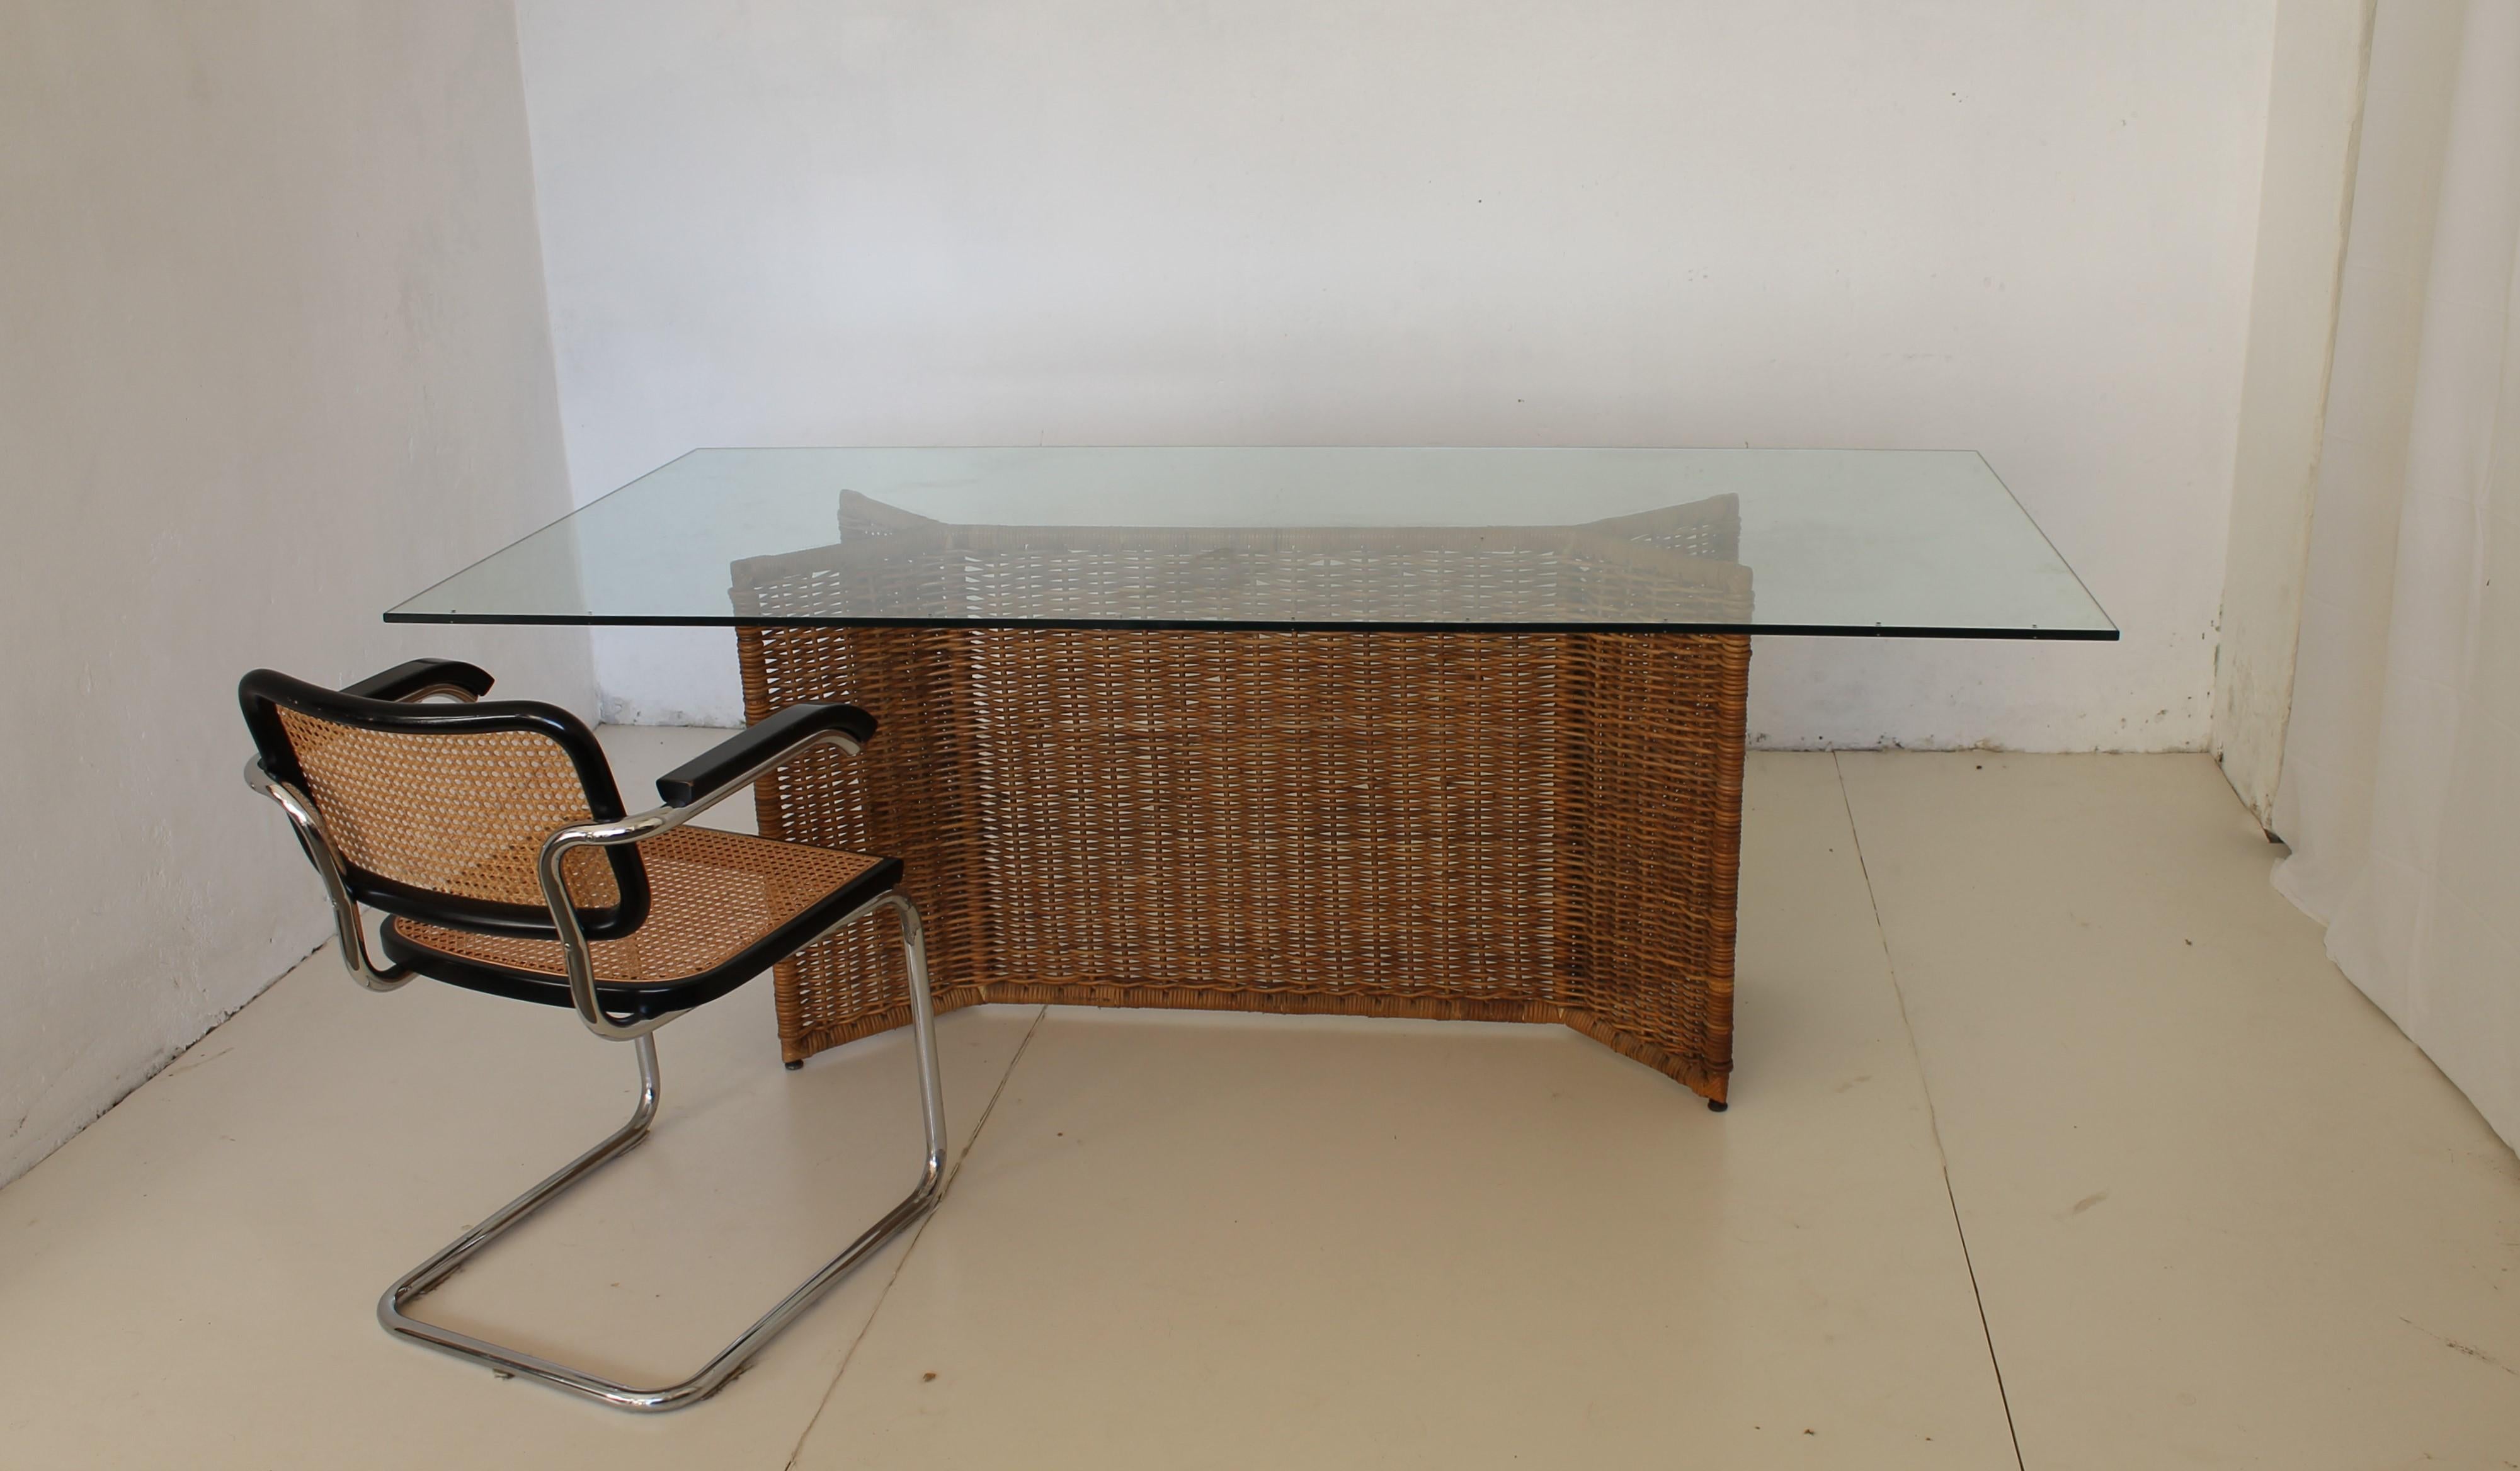 Italian Mid-Century Wicker and Tempered Glass Table, circa 1965.

A large rectangle dining table that will accommodate all your guests. A stable, powder-coated metal frame is braided with rattan and a transparent table top made of tempered glass.